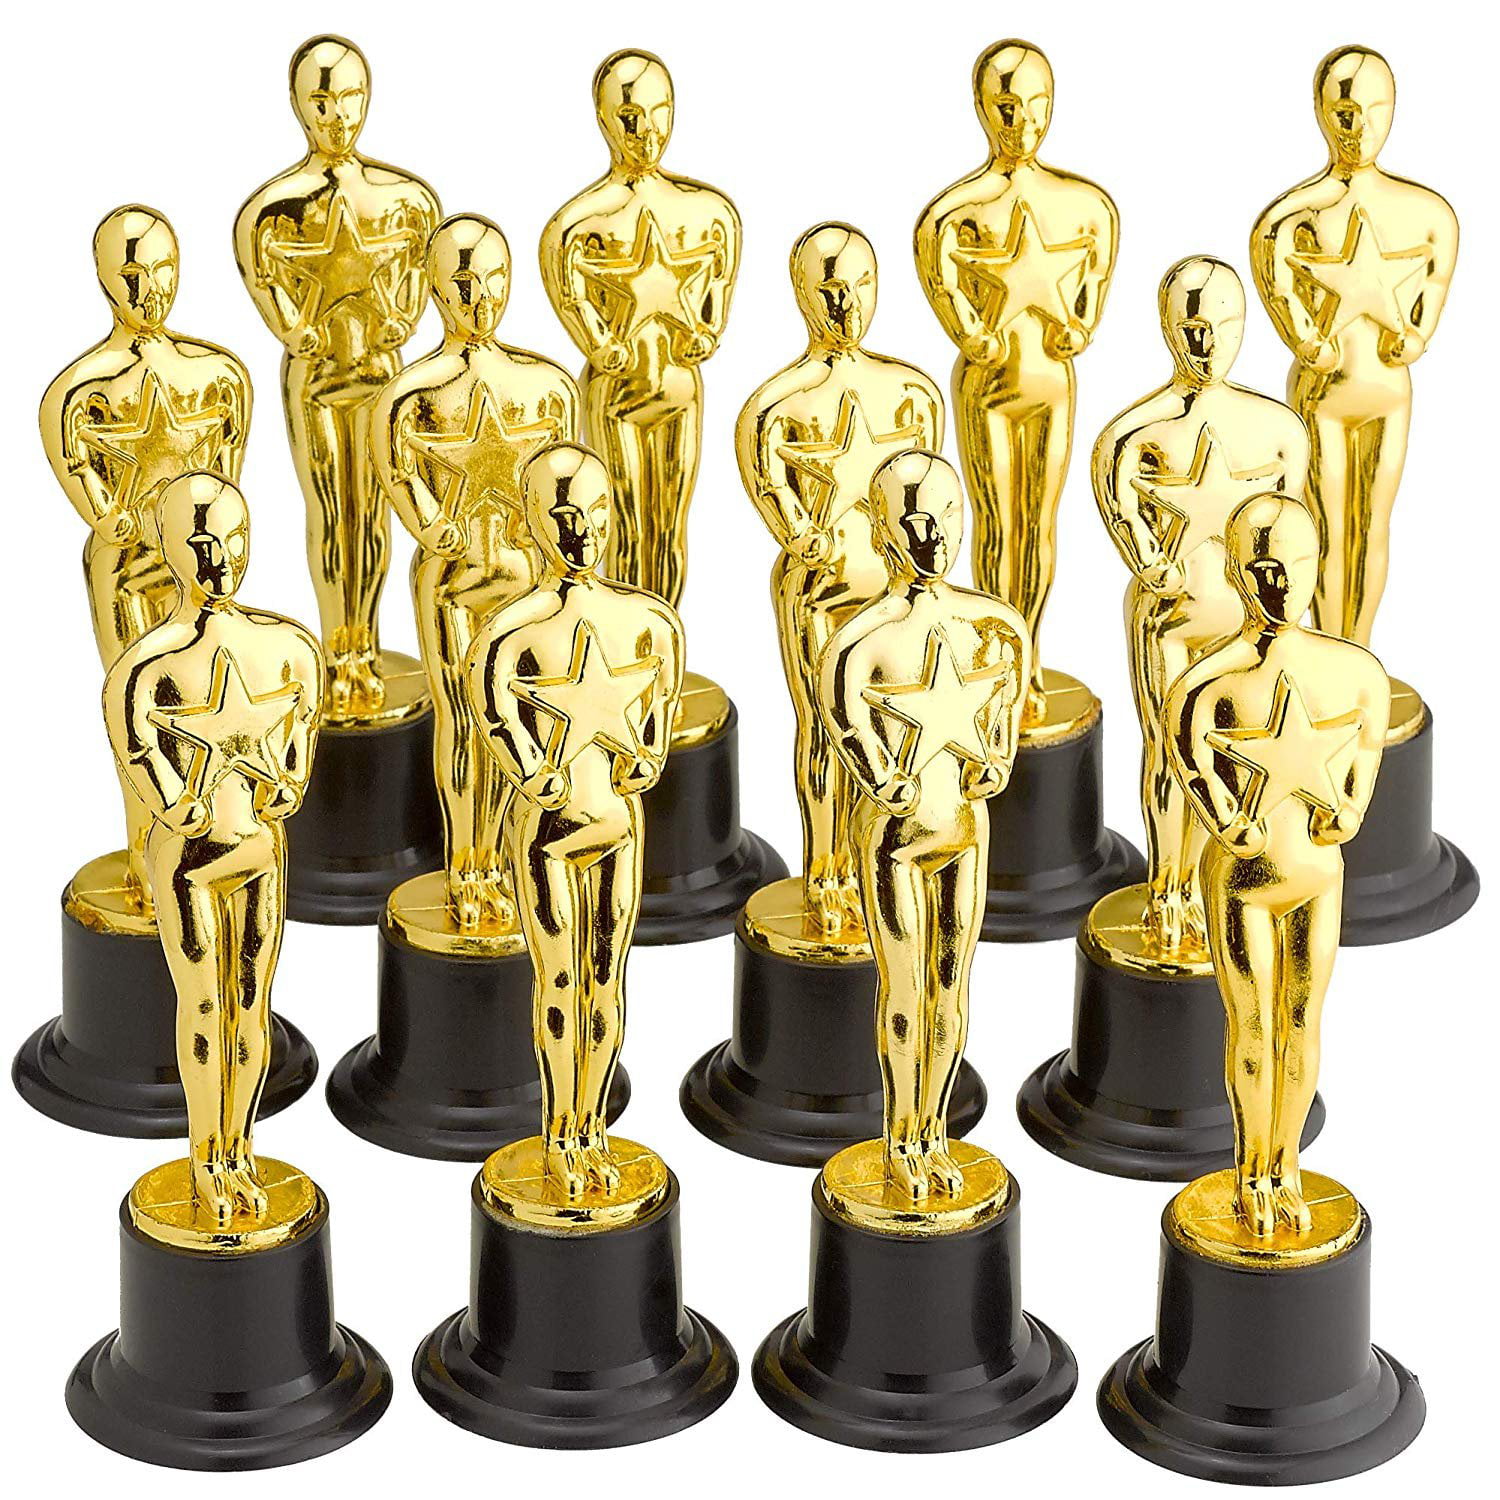 Award Trophy Plastic Premium Trophies for Carnivals Parties Sports Competition 